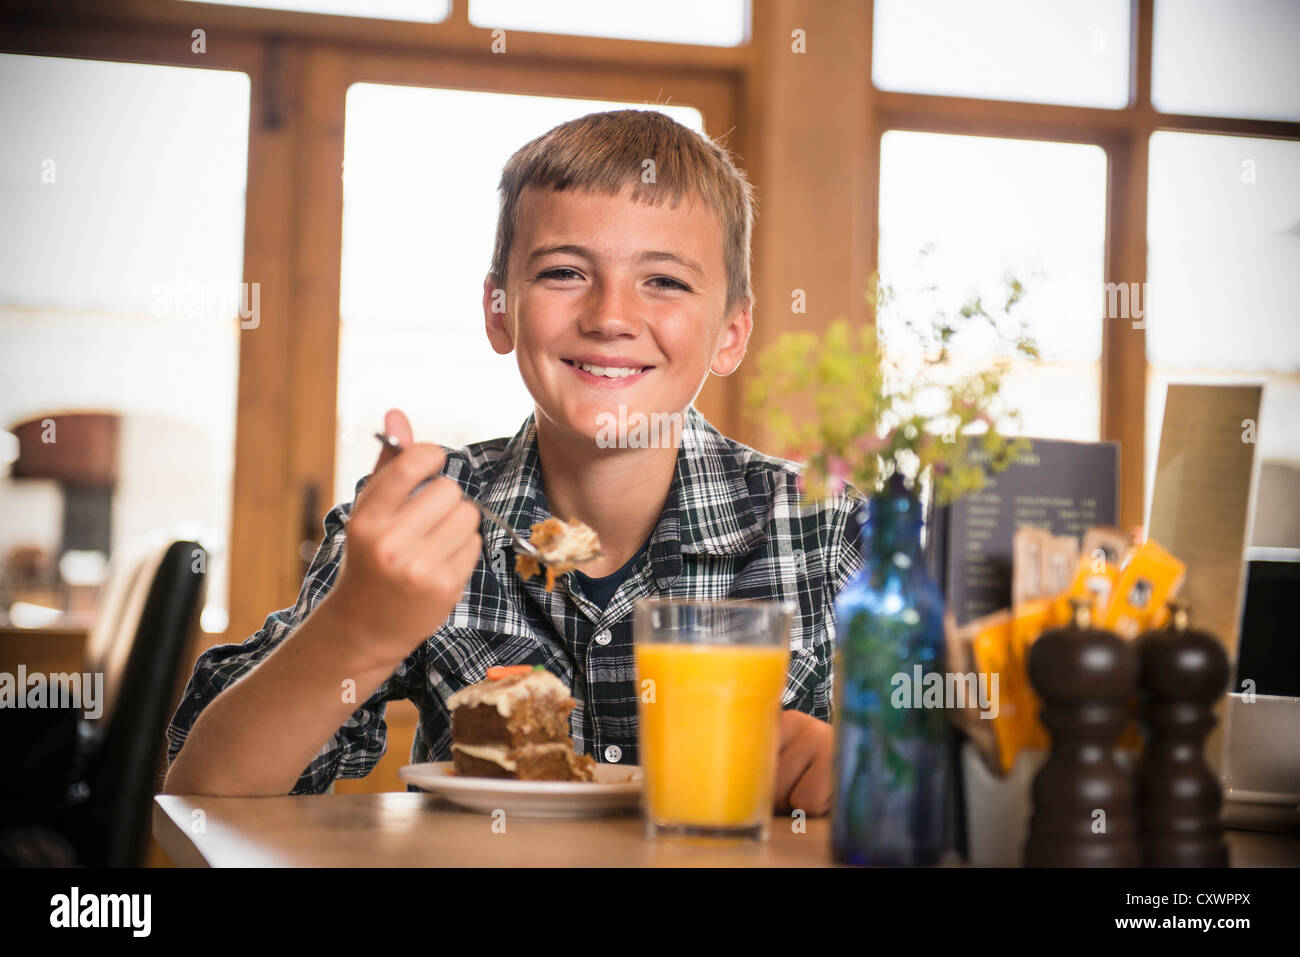 Smiling boy eating breakfast at table Banque D'Images